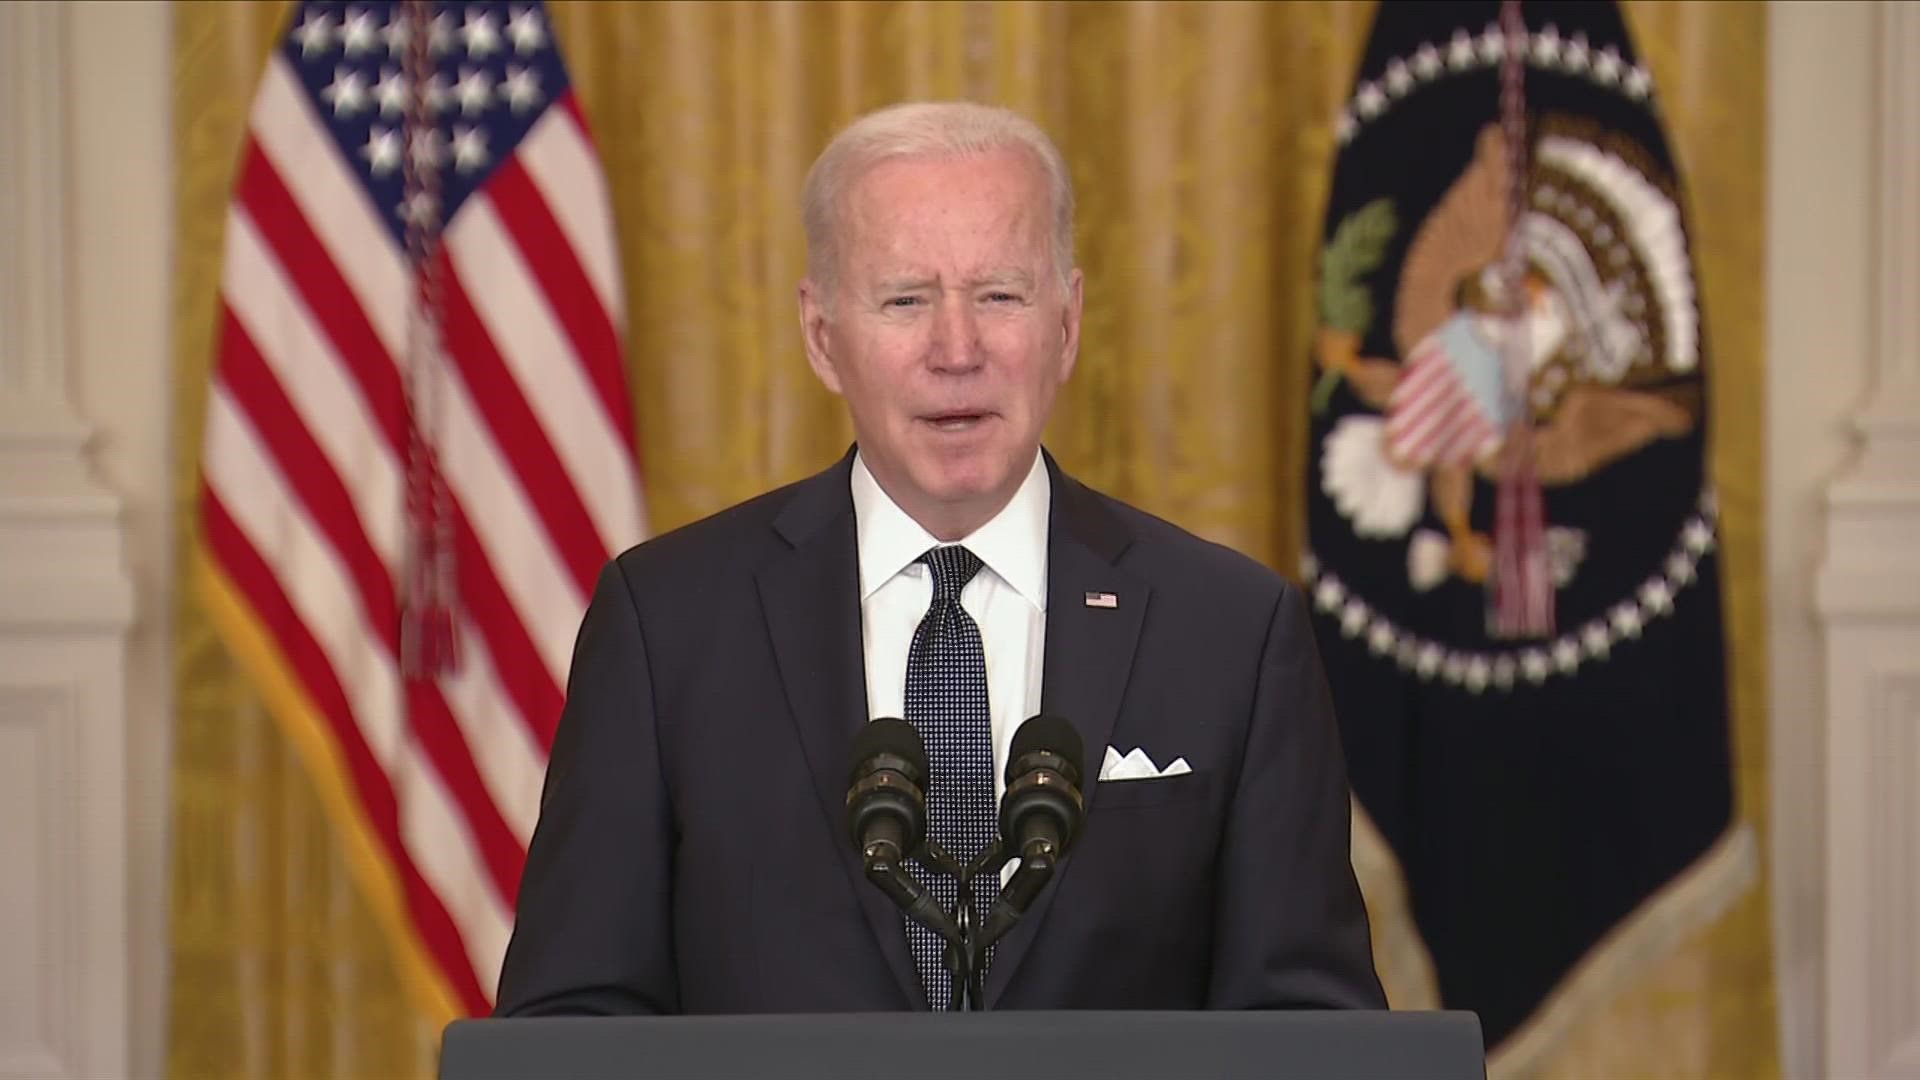 Biden said the US is open to diplomacy but ready to respond to an invasion, which he said is still "possible."